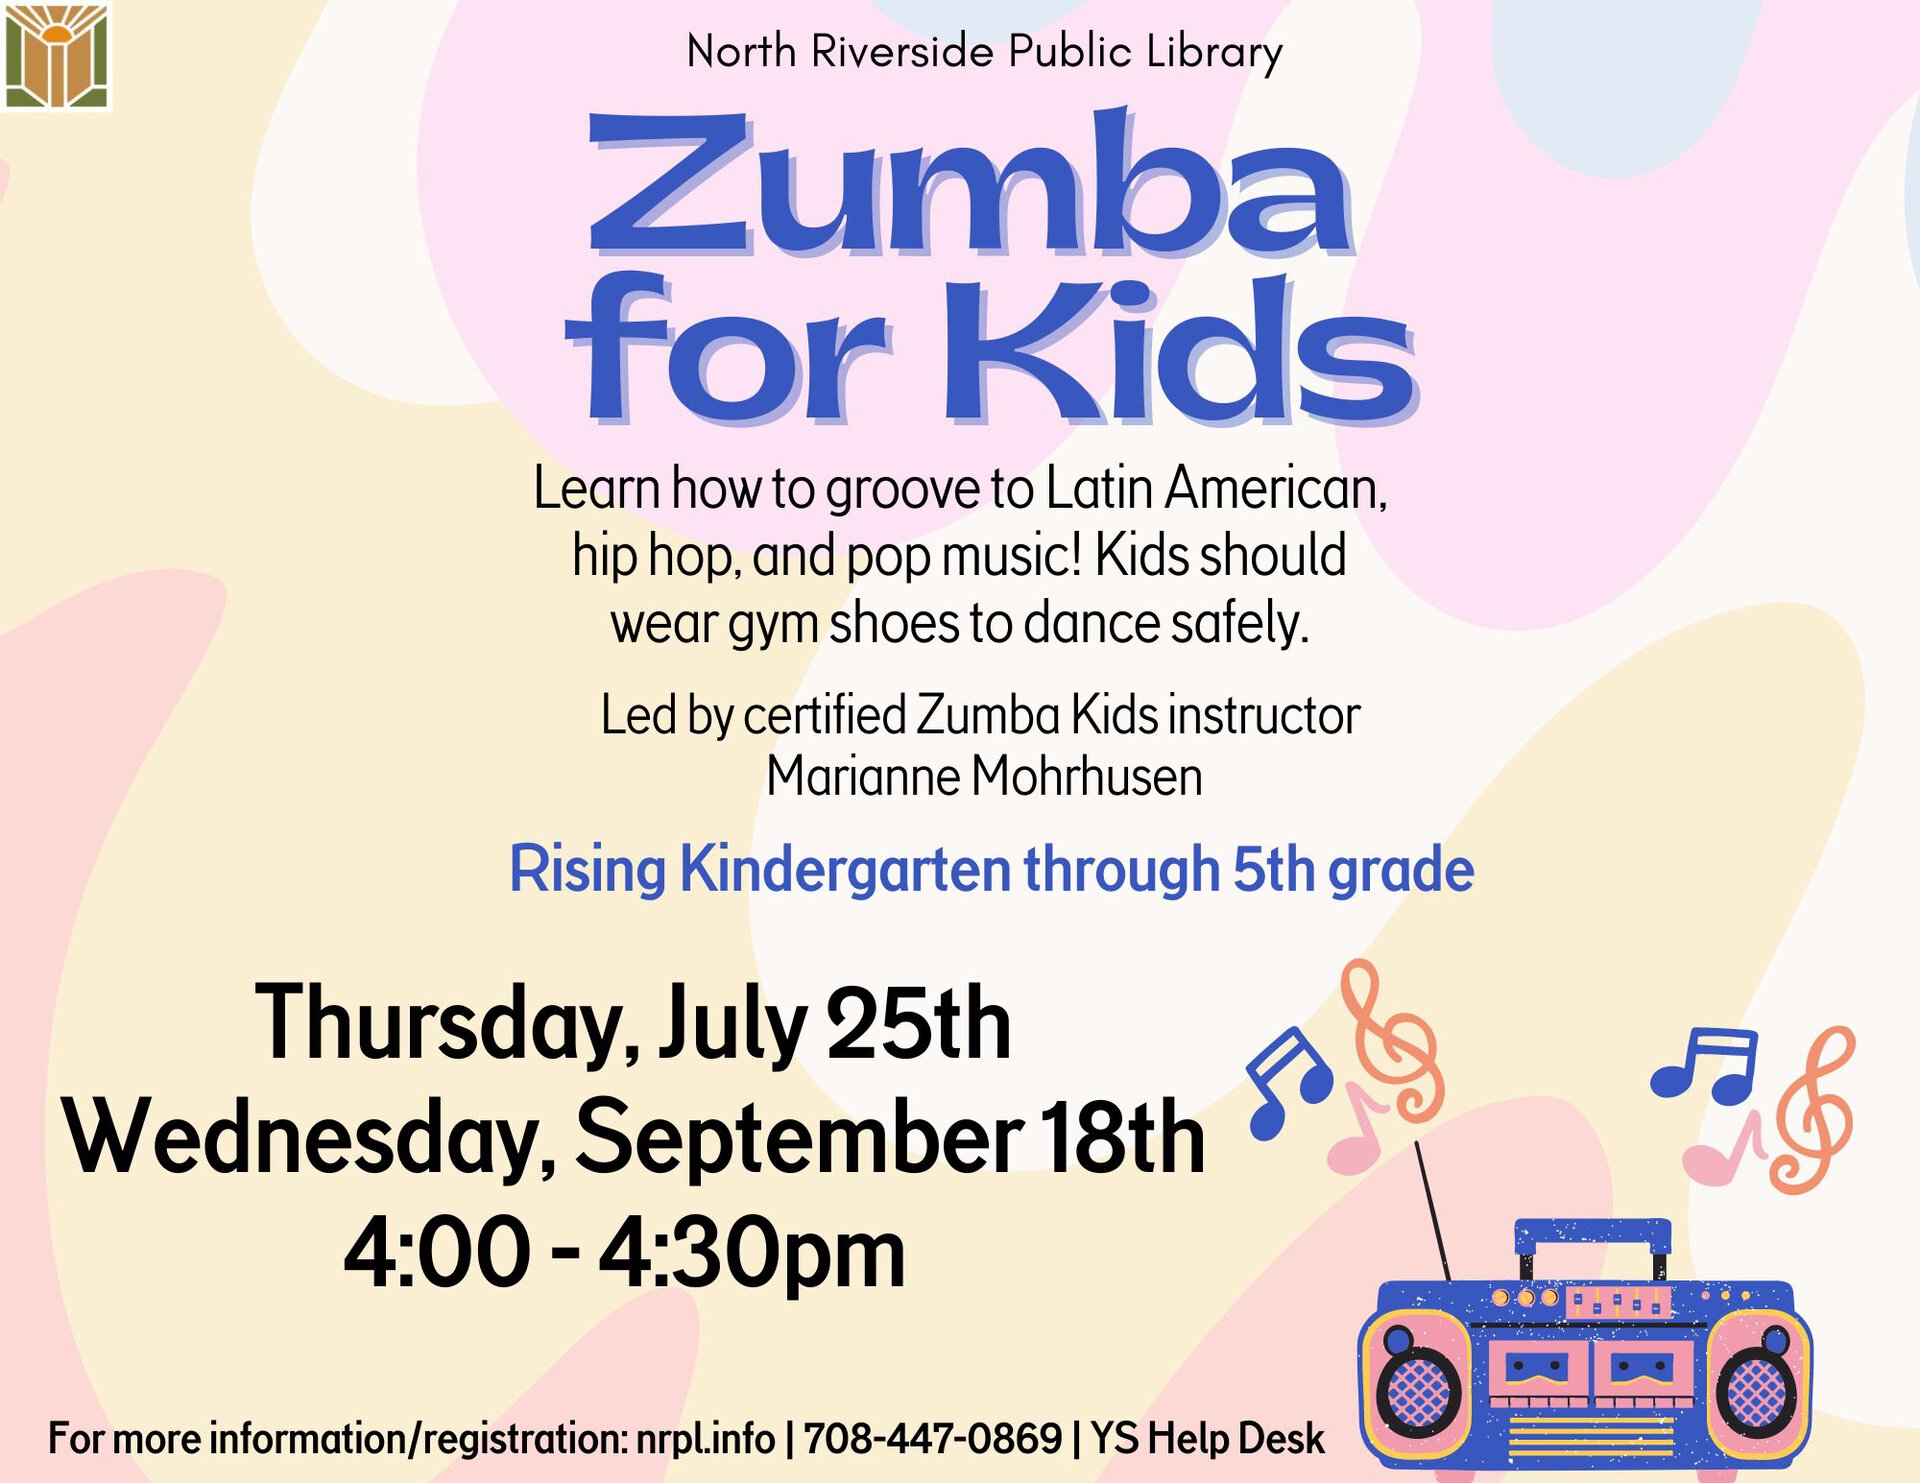 Zumba for Kids. July 25 & September 18 from 4 – 4:30 pm. Learn how to groove to Latin American , hip hop, and pop music! Kids should wear gym shoes to dance safely. Rising Kindergarten through 5th graders.